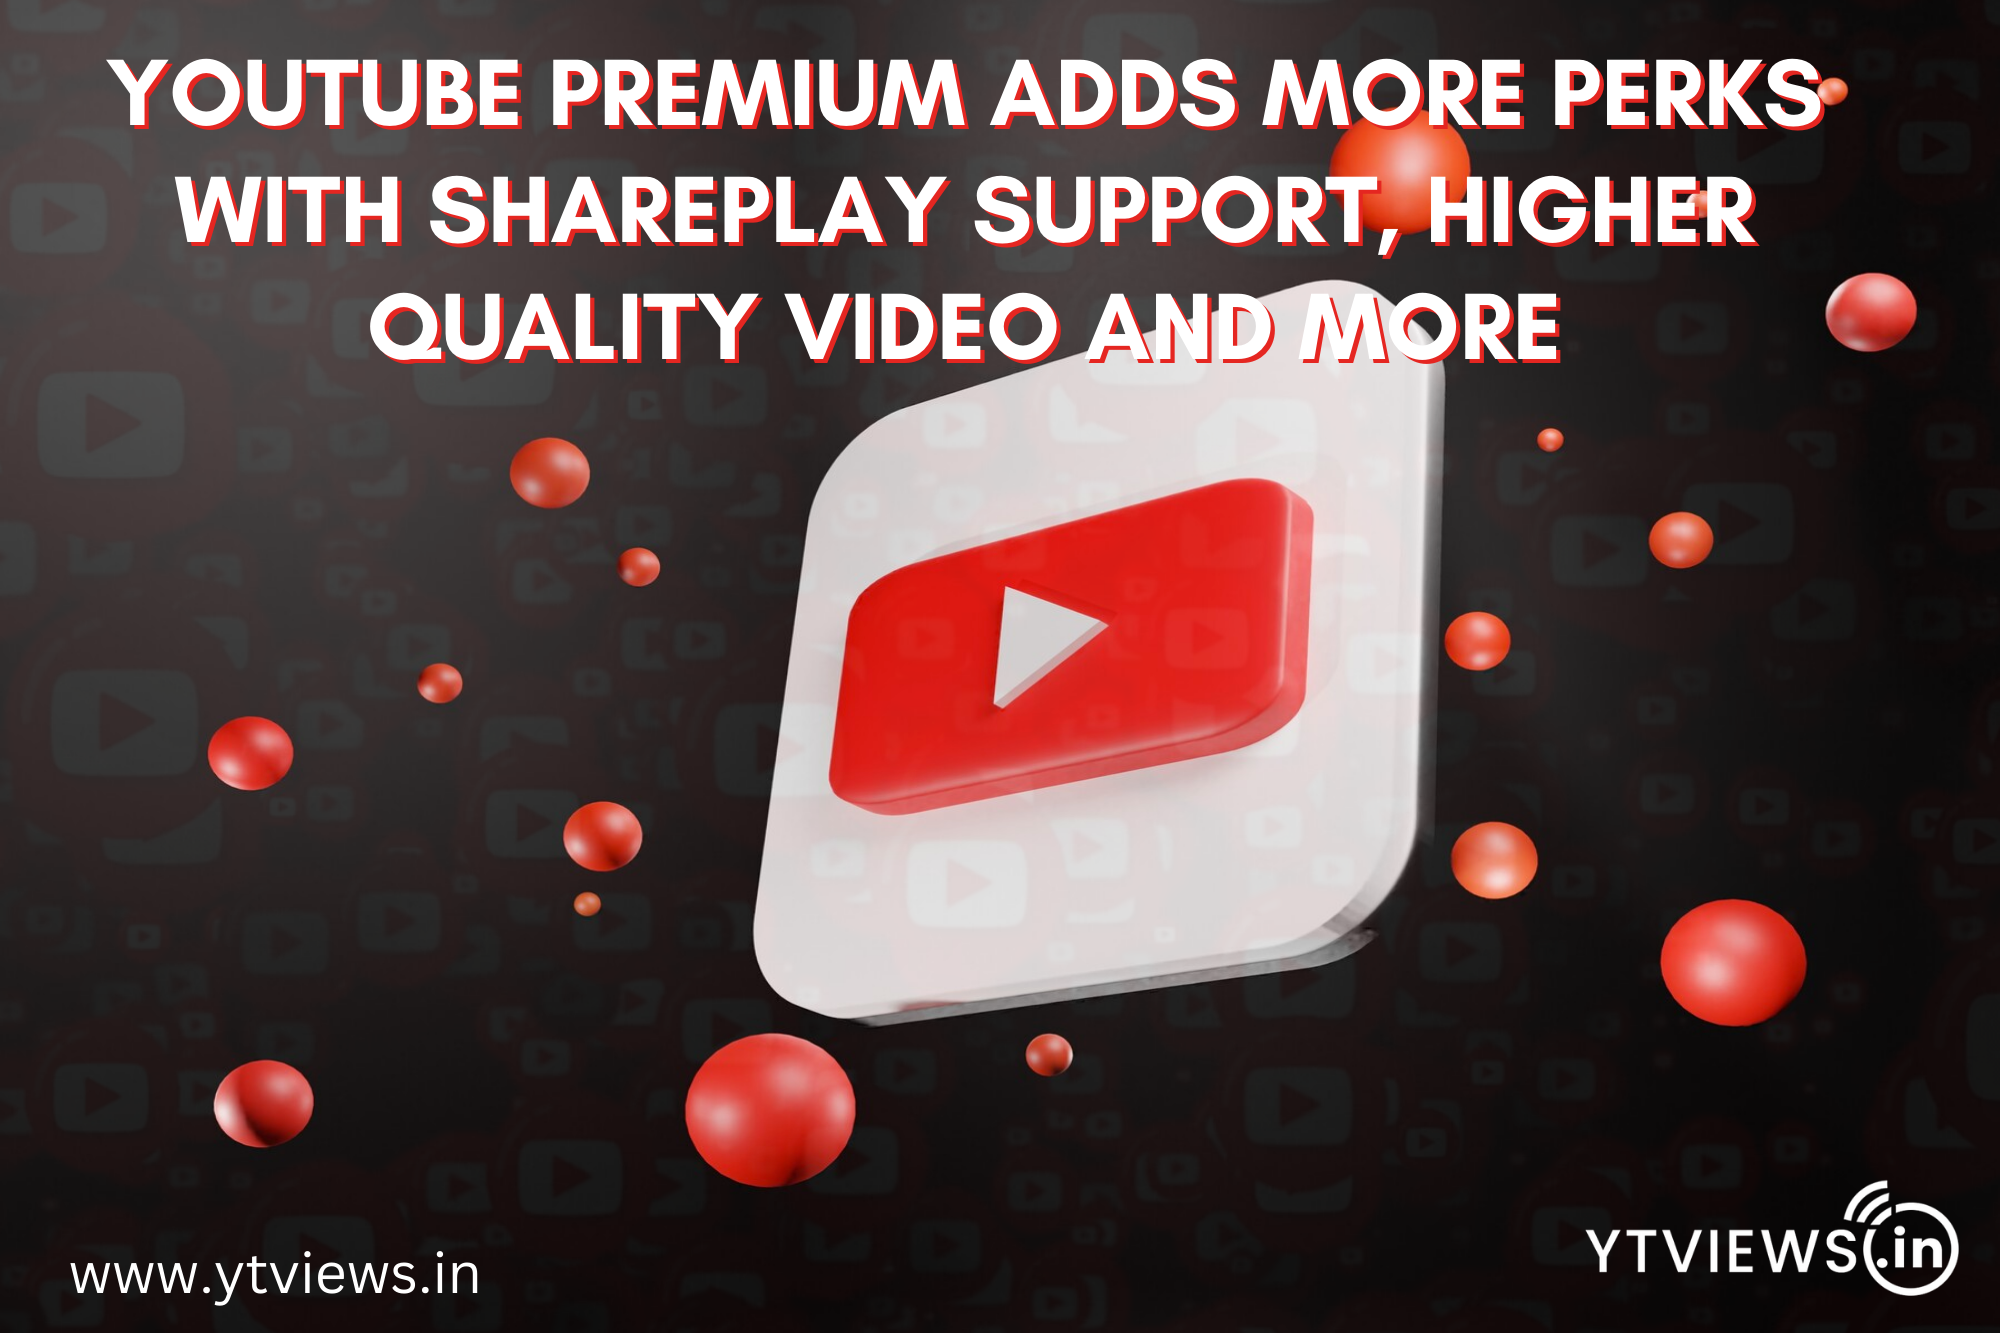 YouTube Premium adds more perks with Share Play support, higher quality video and more